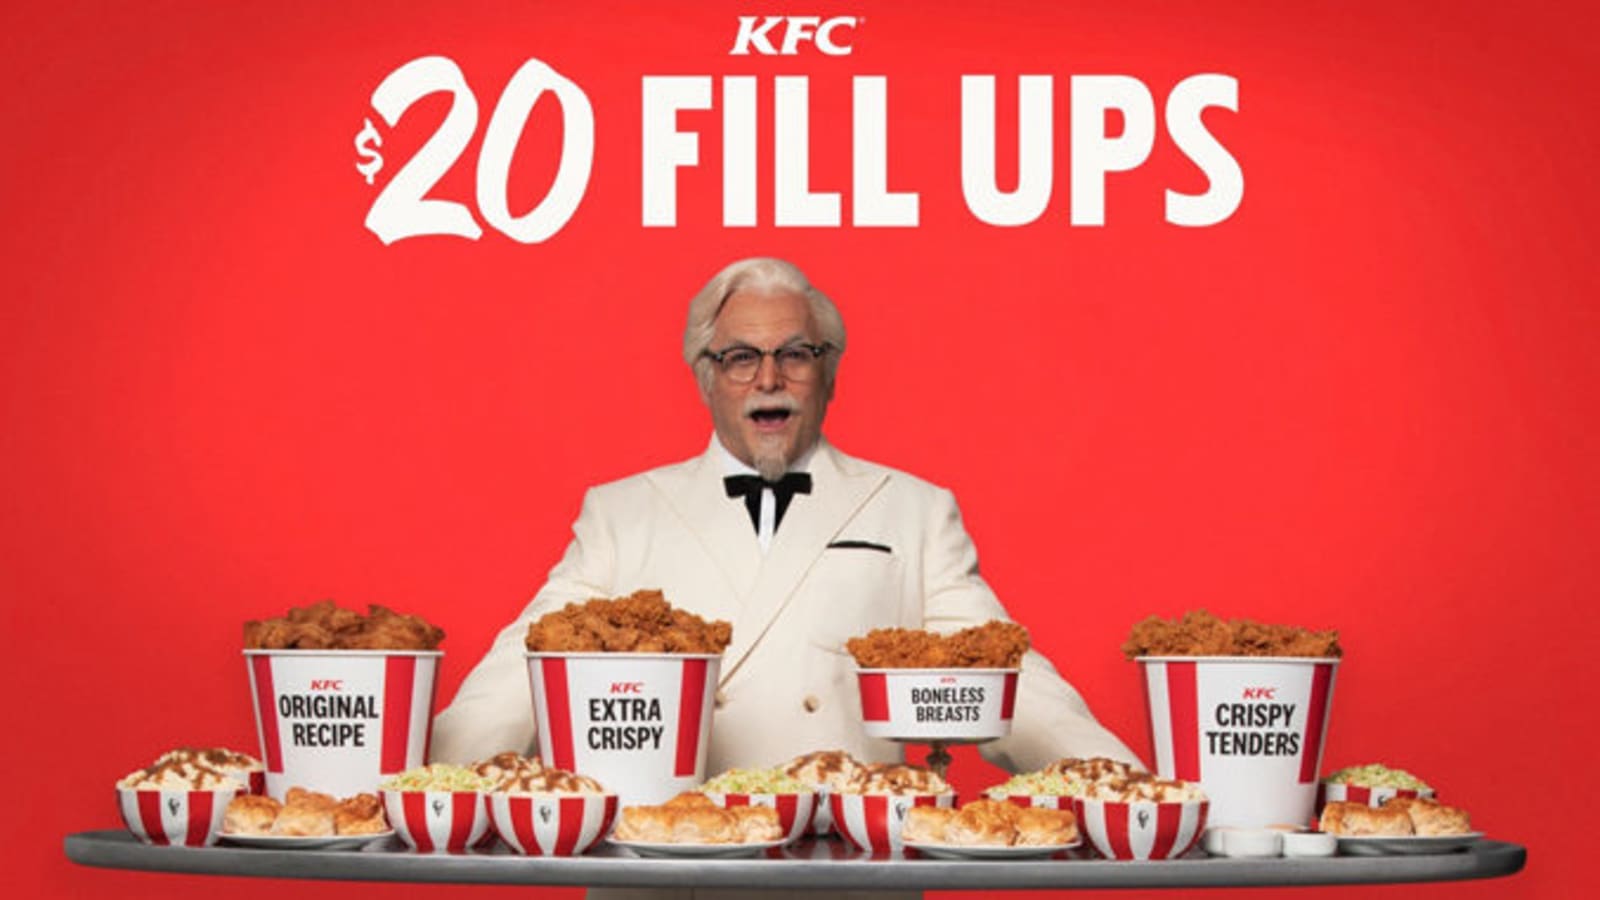 Kfc commercial newest 